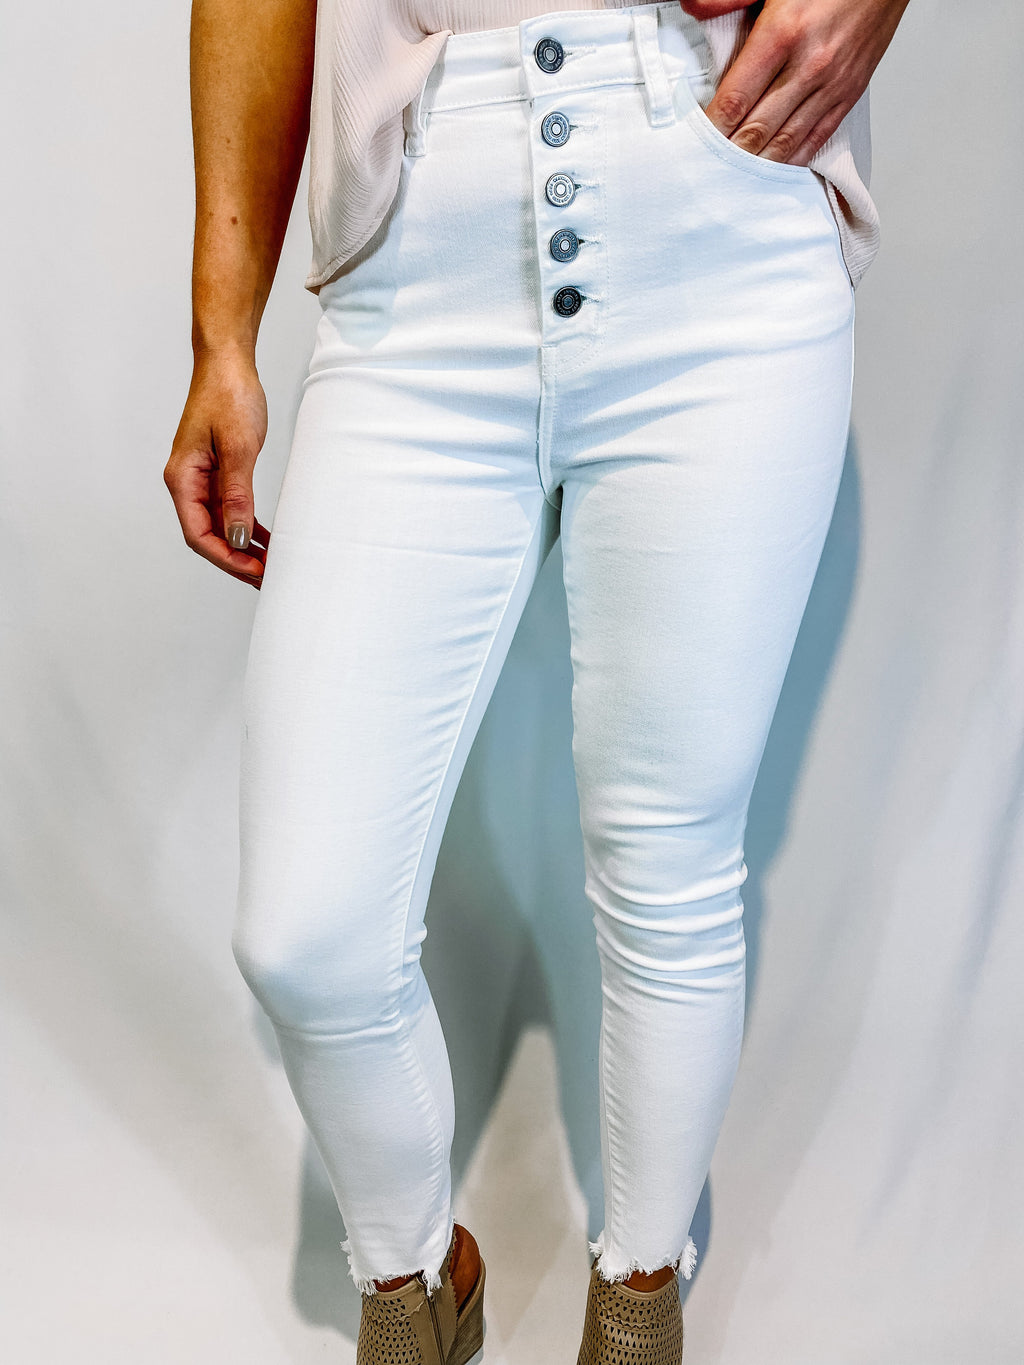 <img src="White-High-Rise-Stretch-Ankle-Skinny-Jeans-Front.jpg" alt="white high rise ankle skinny jeans front view">